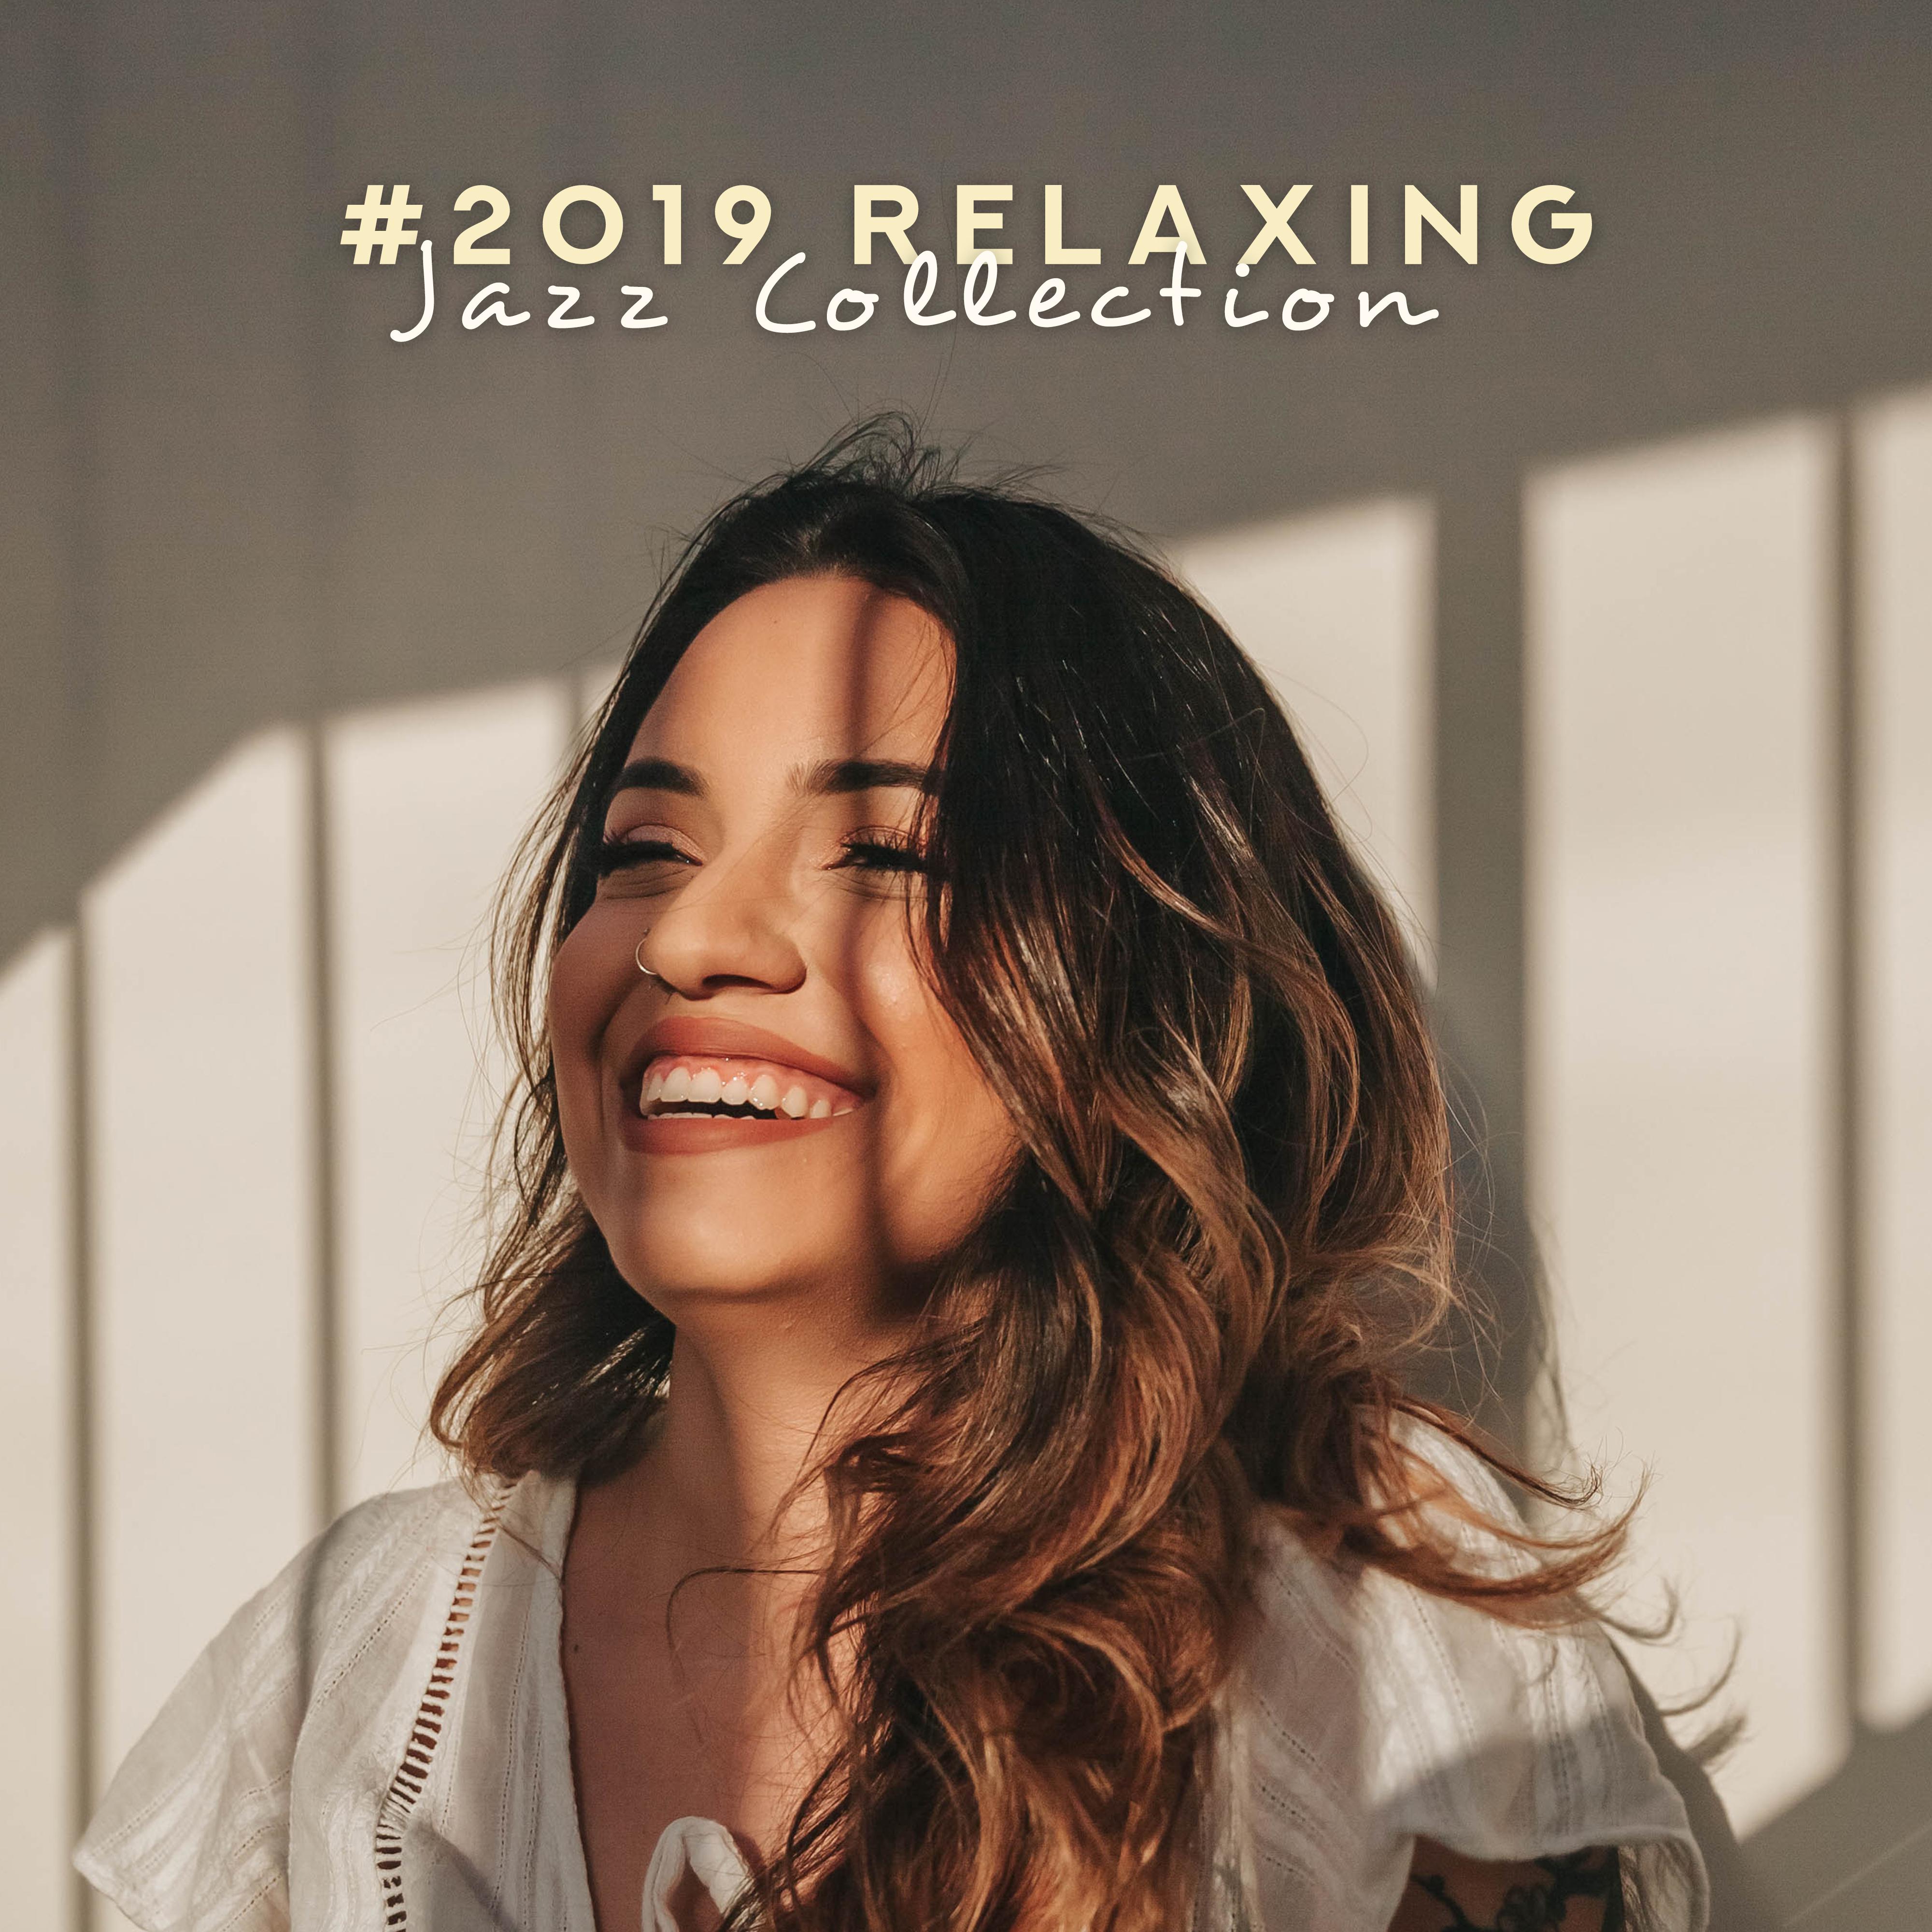 2019 Relaxing Jazz Collection  Smooth Jazz 2019, Coffee Music, Instrumental Jazz to Rest, Sleep, Relax, Mellow Jazz 2019